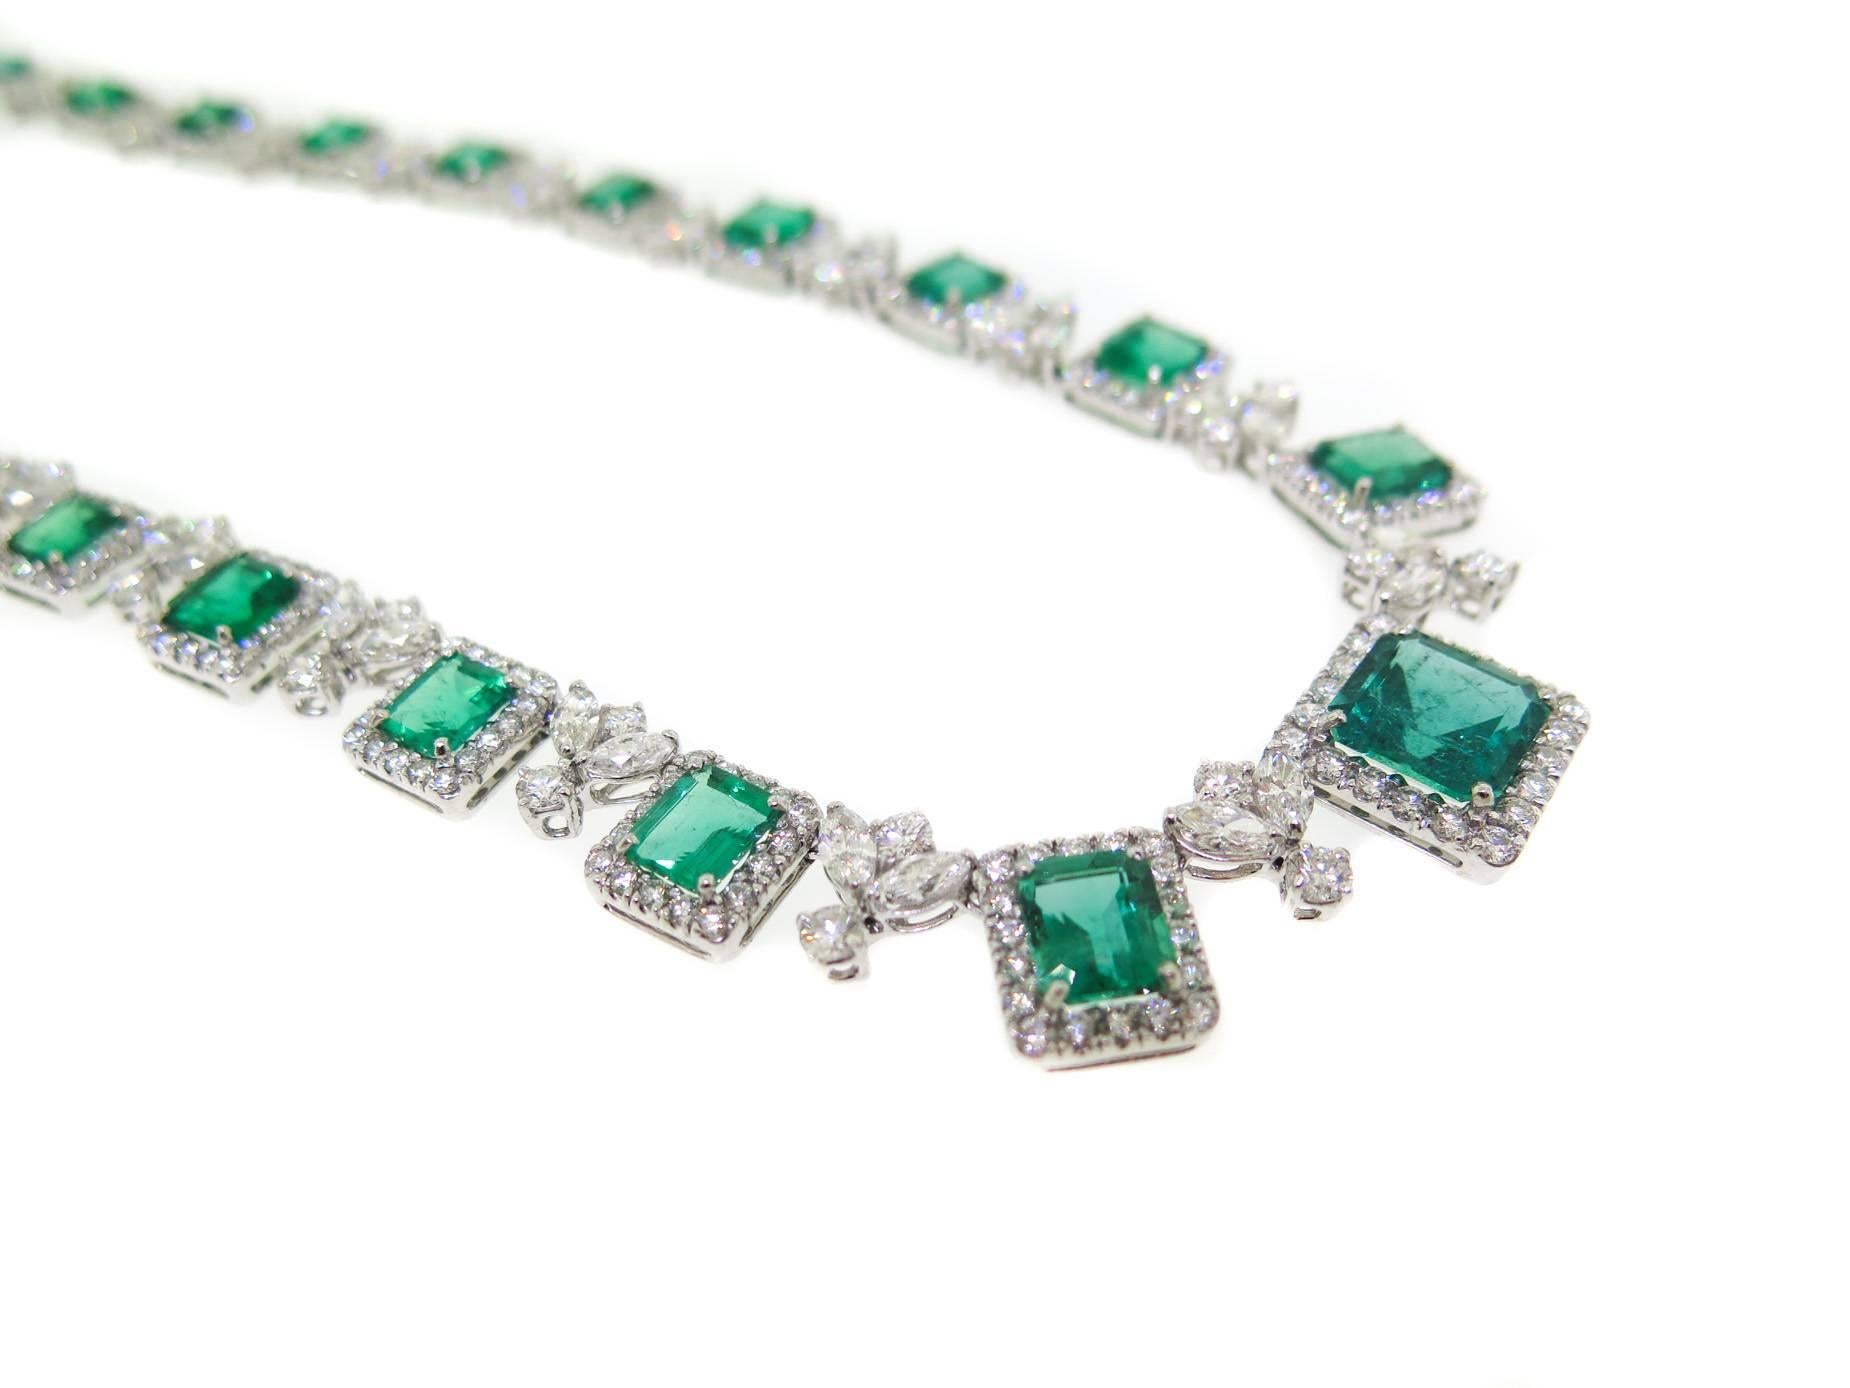 A chic and elegant necklace consisting of 23 emerald weighing 30.10 carats surrounded by white diamonds weighing approximately 20.41 carats, hand-made in platinum, hidden diamond box clasp stamped PT950, measures 16